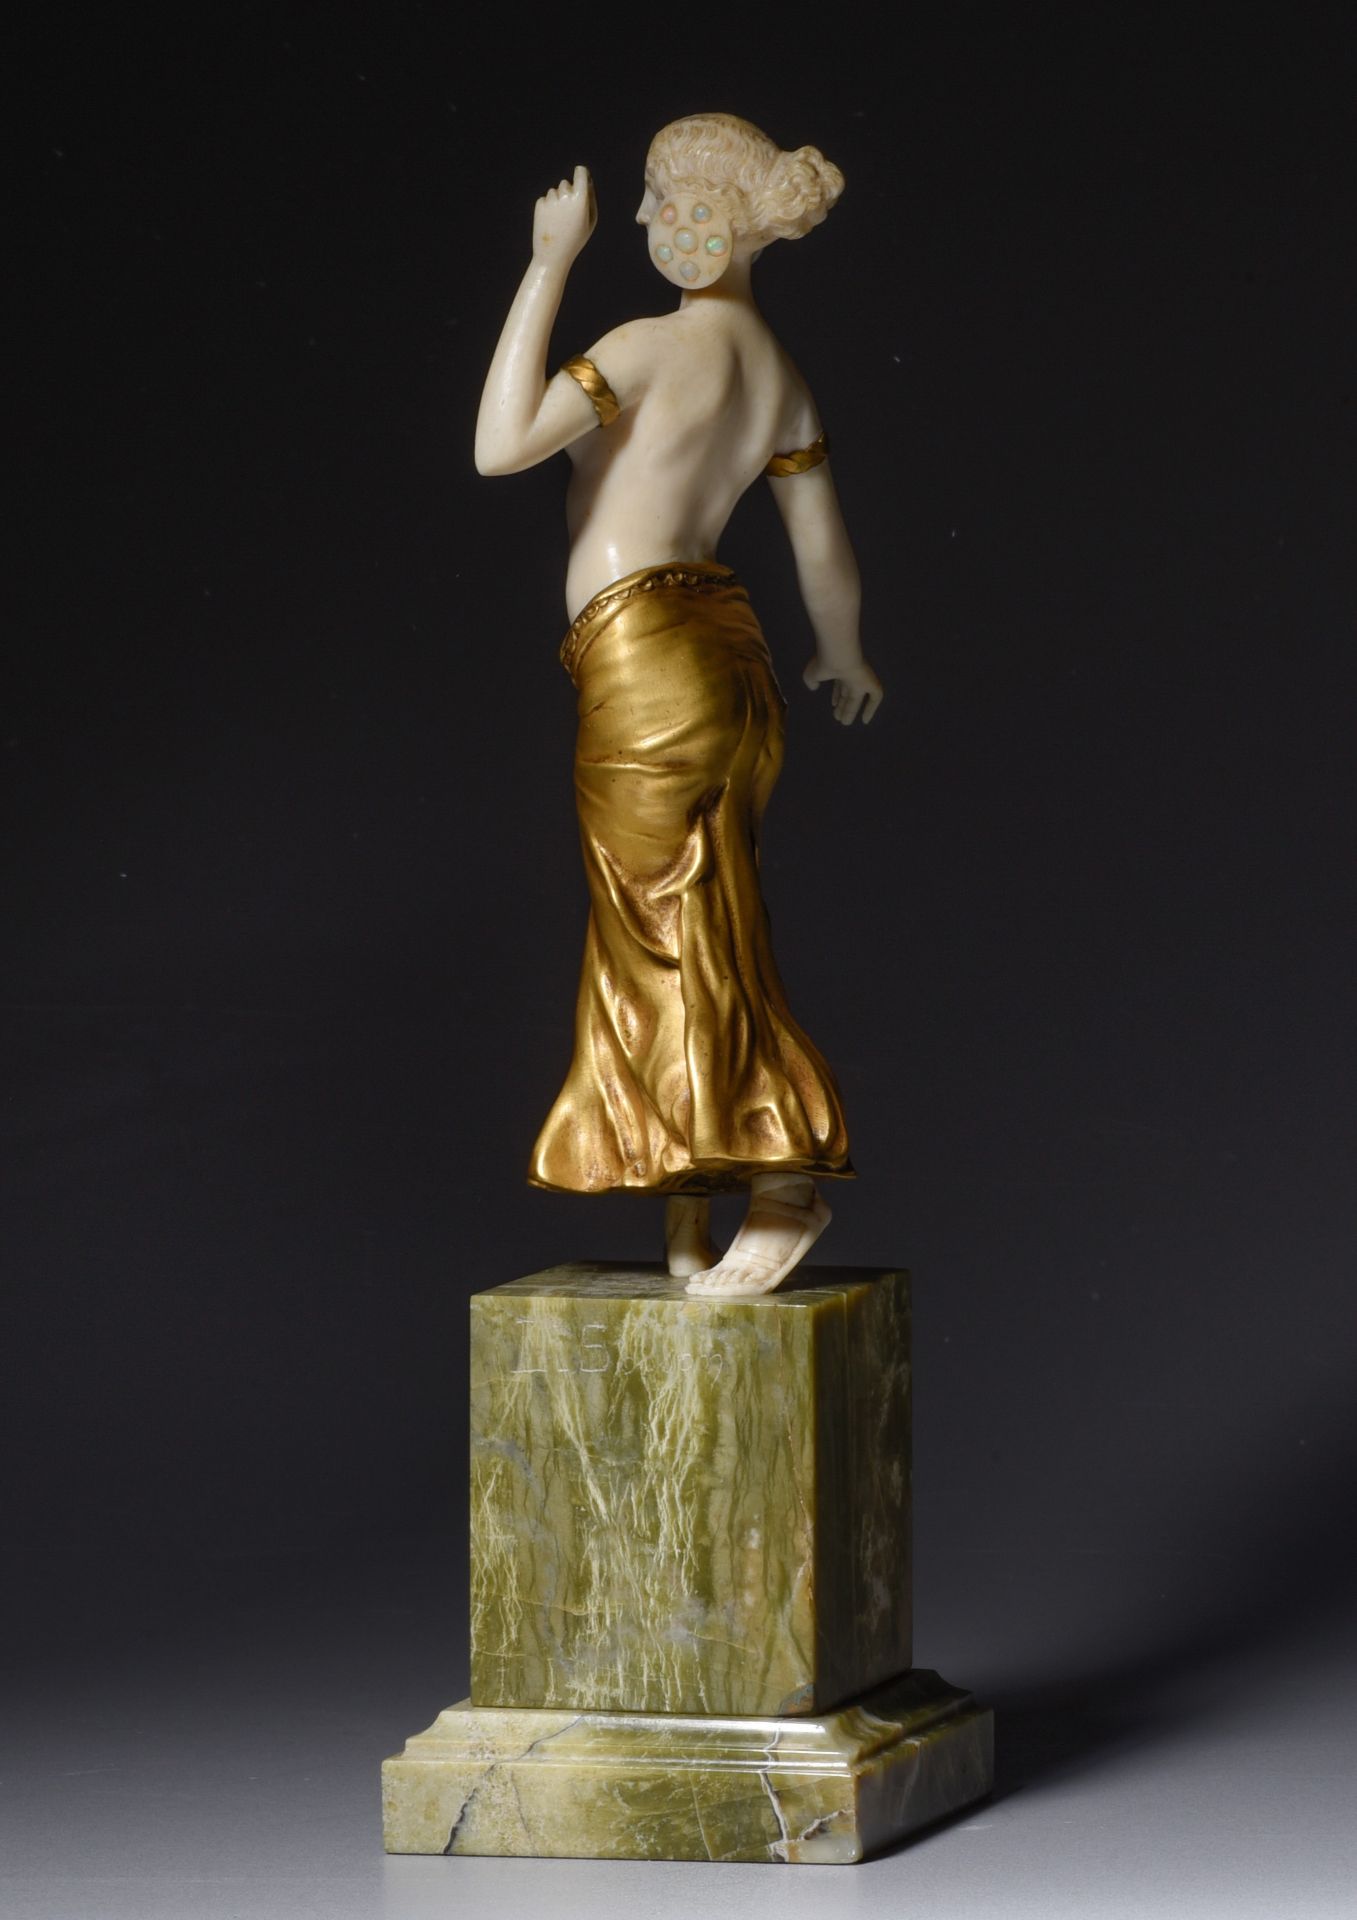 Chryselephantine statuette of a dancing Salomé, 1910-1920, H 25,2 cm - 1075 g (+) - Image 3 of 5